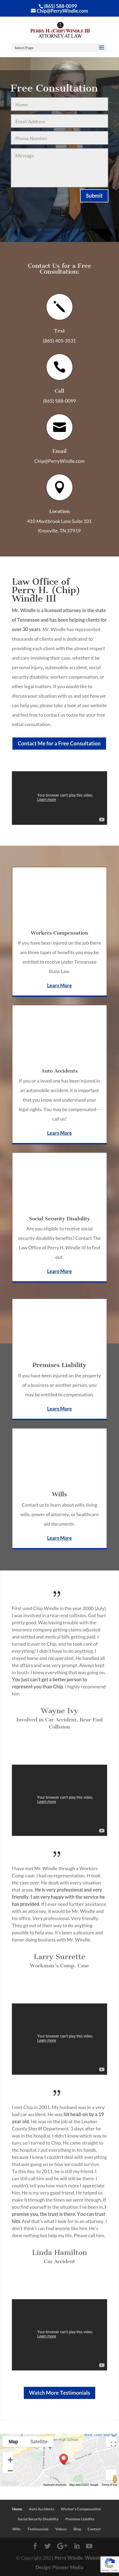 Windle, Perry H III - Knoxville TN Lawyers